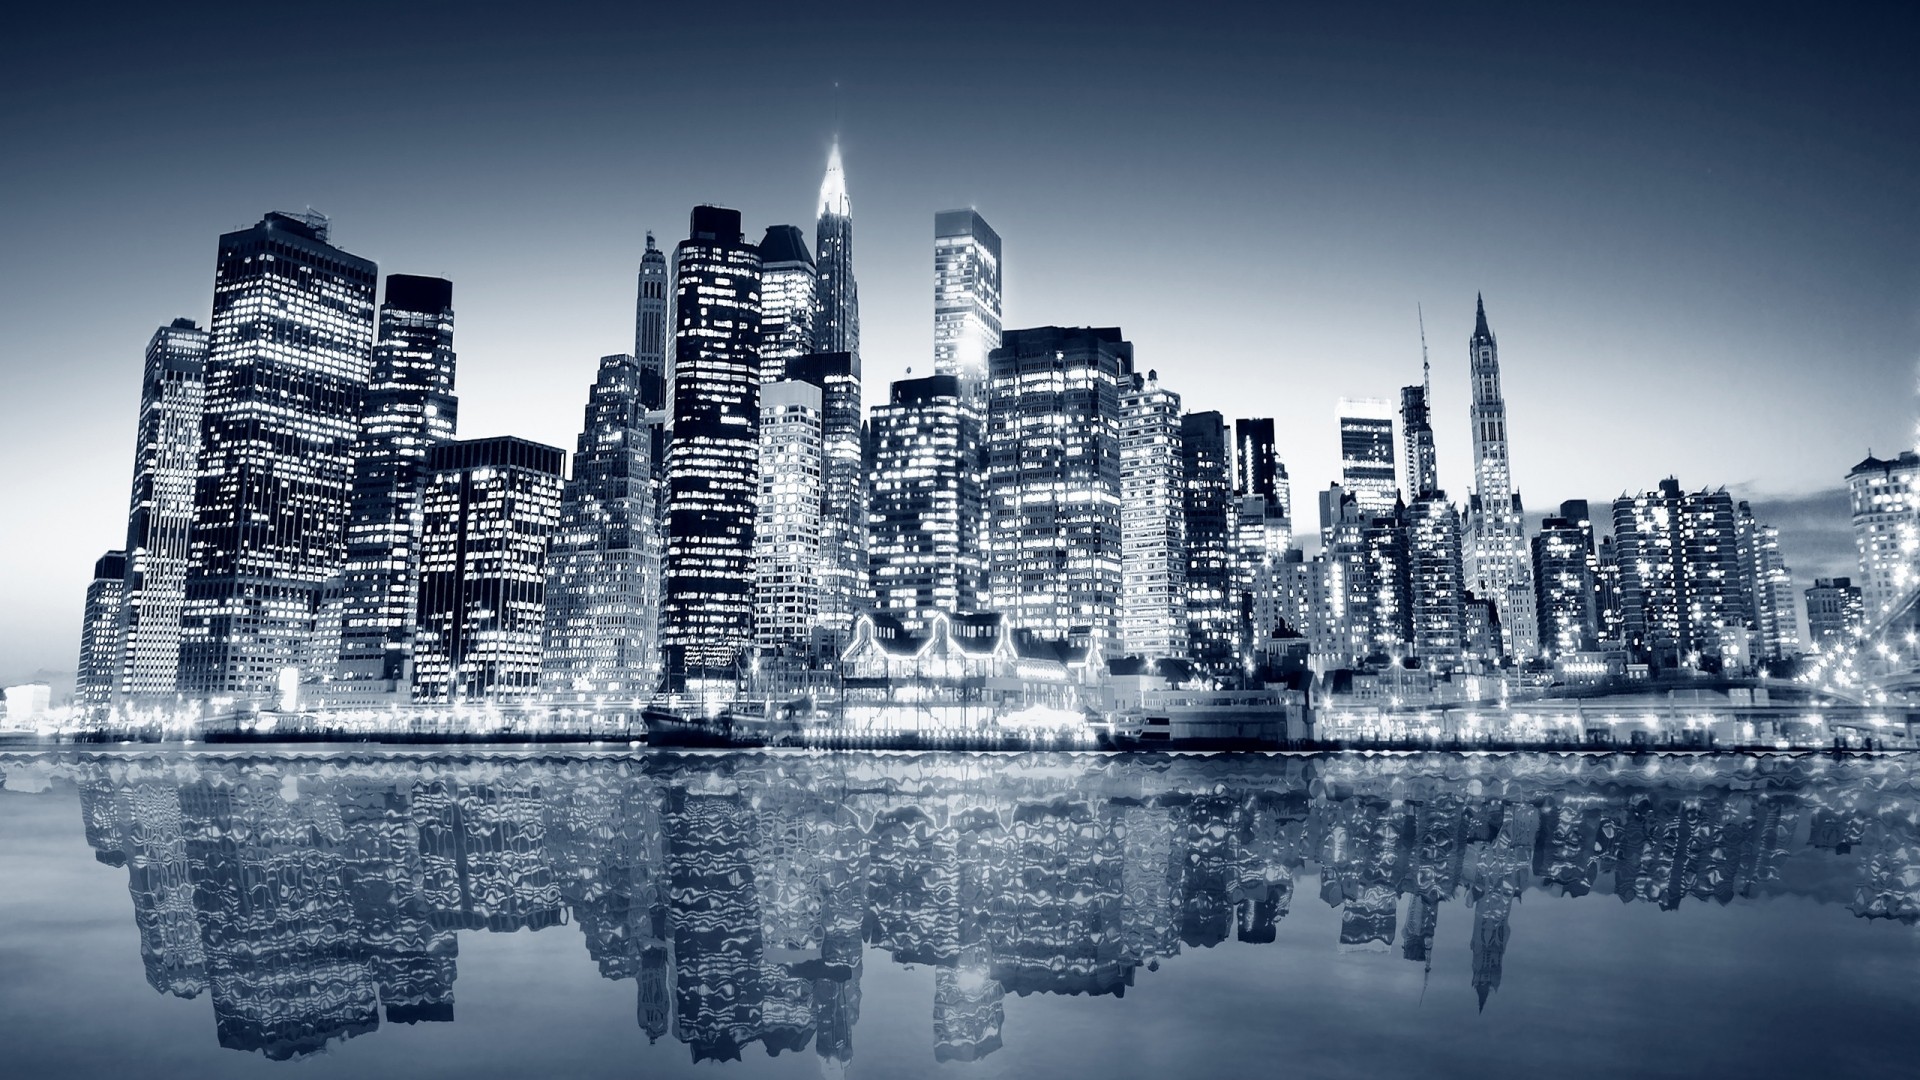 Cool Pictures New York City HD Wallpaper of City   hdwallpaper2013com